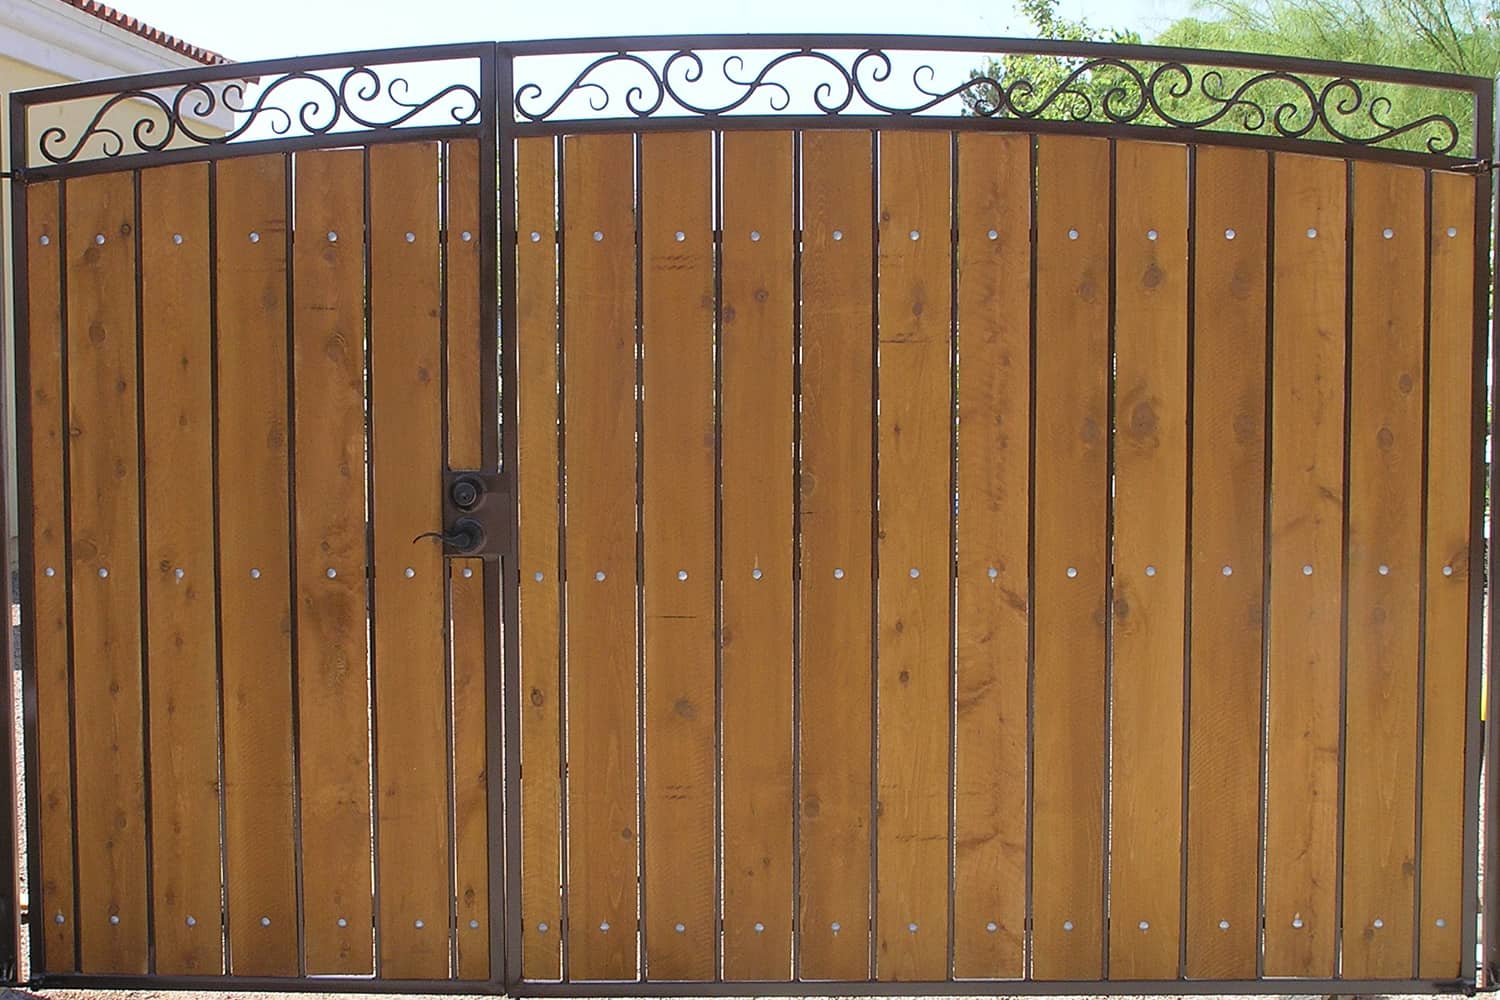 Decorative RV Gate with Stained and Sealed Wood